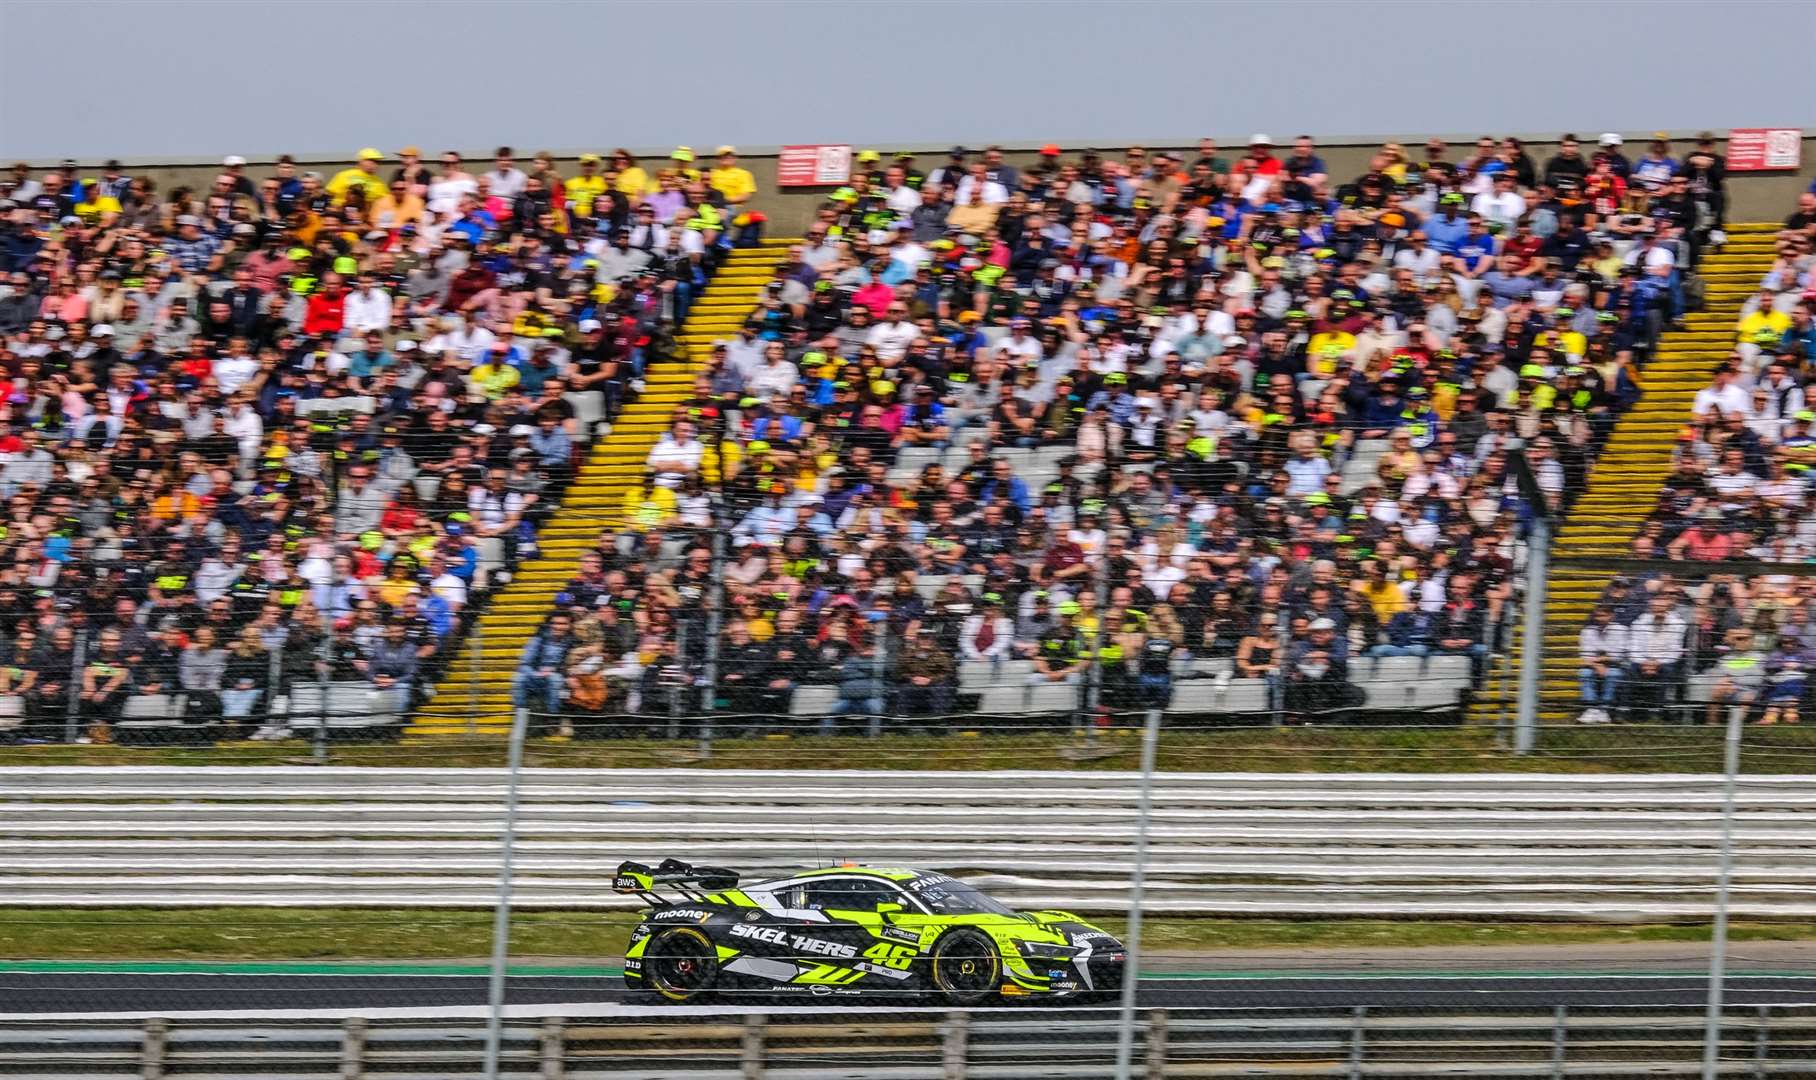 The Paddock Hill grandstand was packed on Sunday as scores of fans turned out to see Valentino Rossi. Pictures: SRO